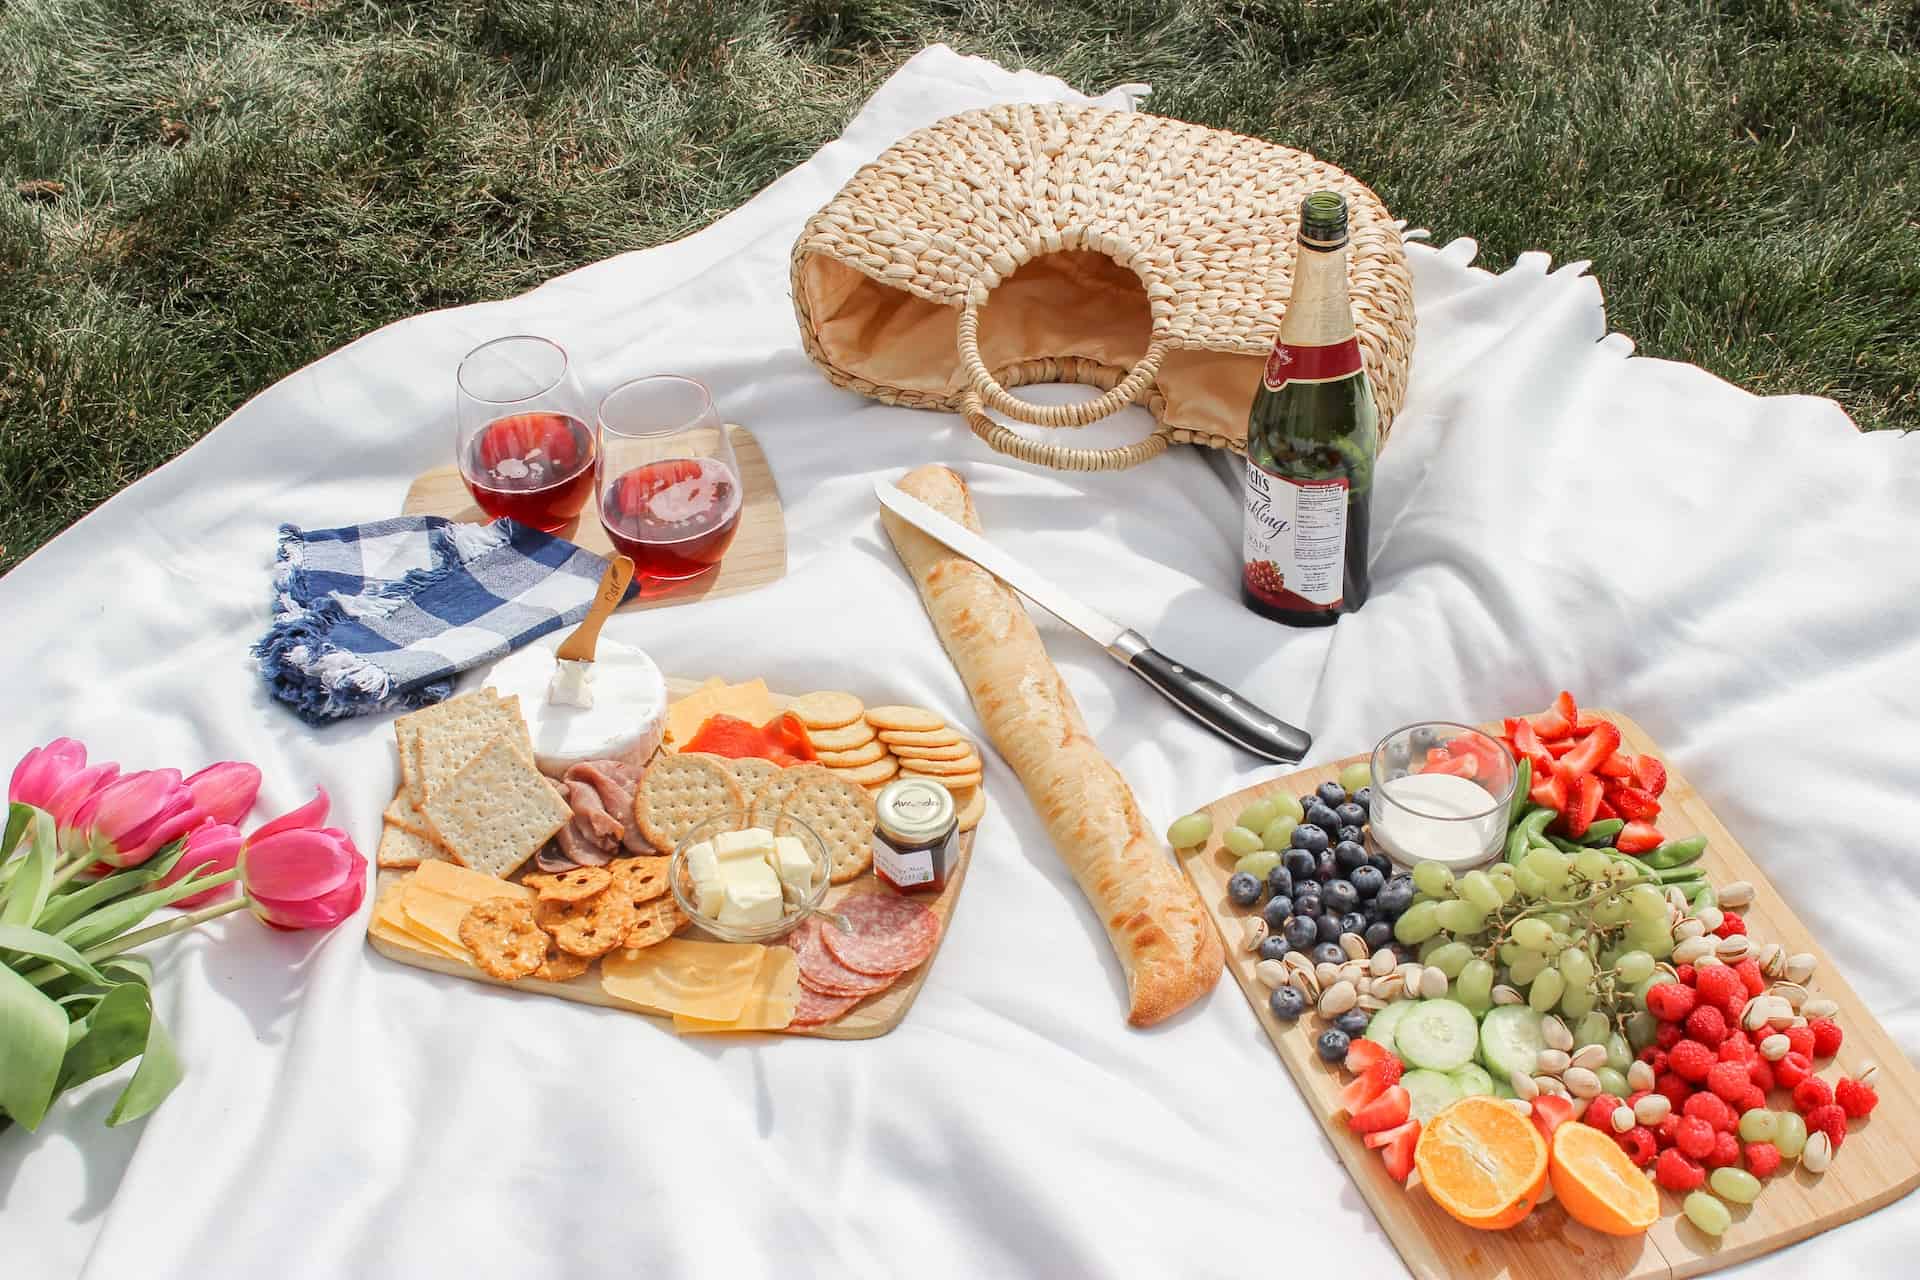 Picnic Charcuterie Board How To - Rachel's Crafted Life